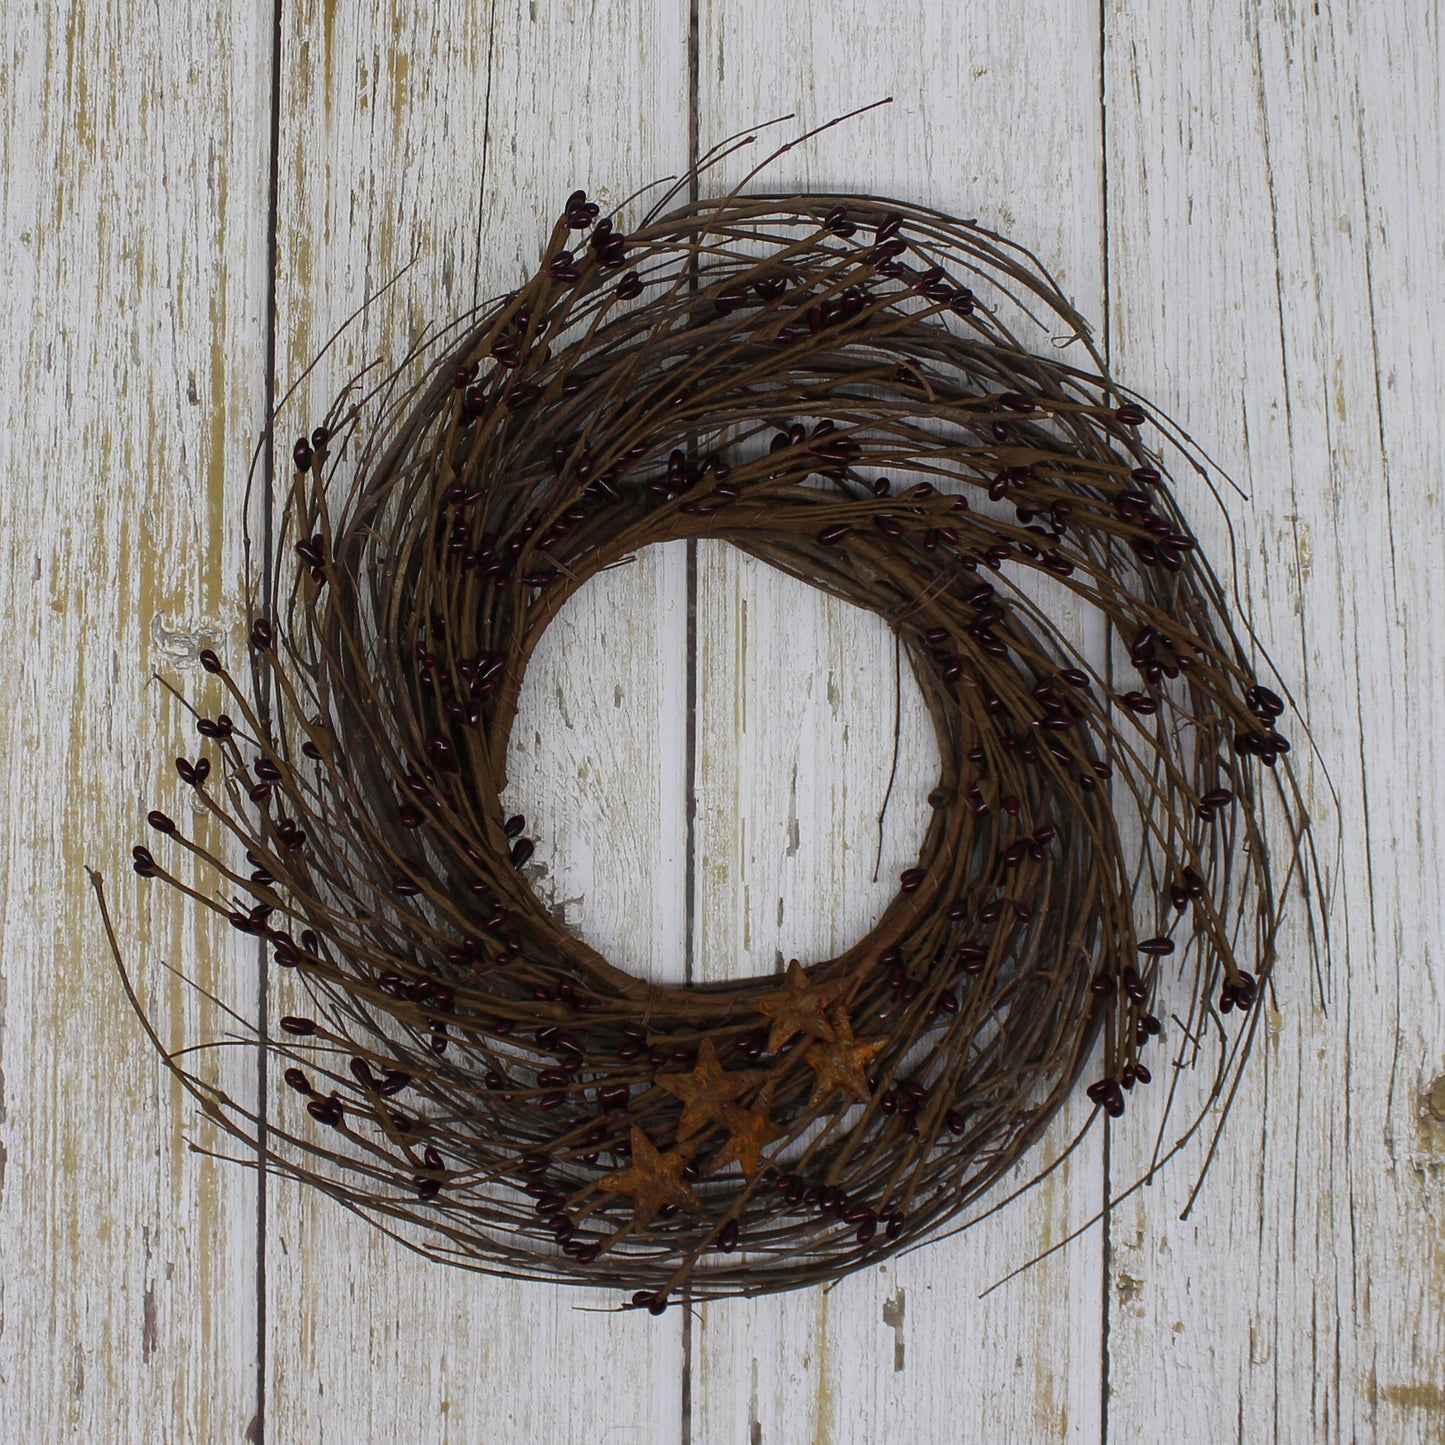 CVHOMEDECO. Primitives Rustic Pip Berries and Twig with Rusty Barn Stars Wreath, 12 Inch, Burgundy